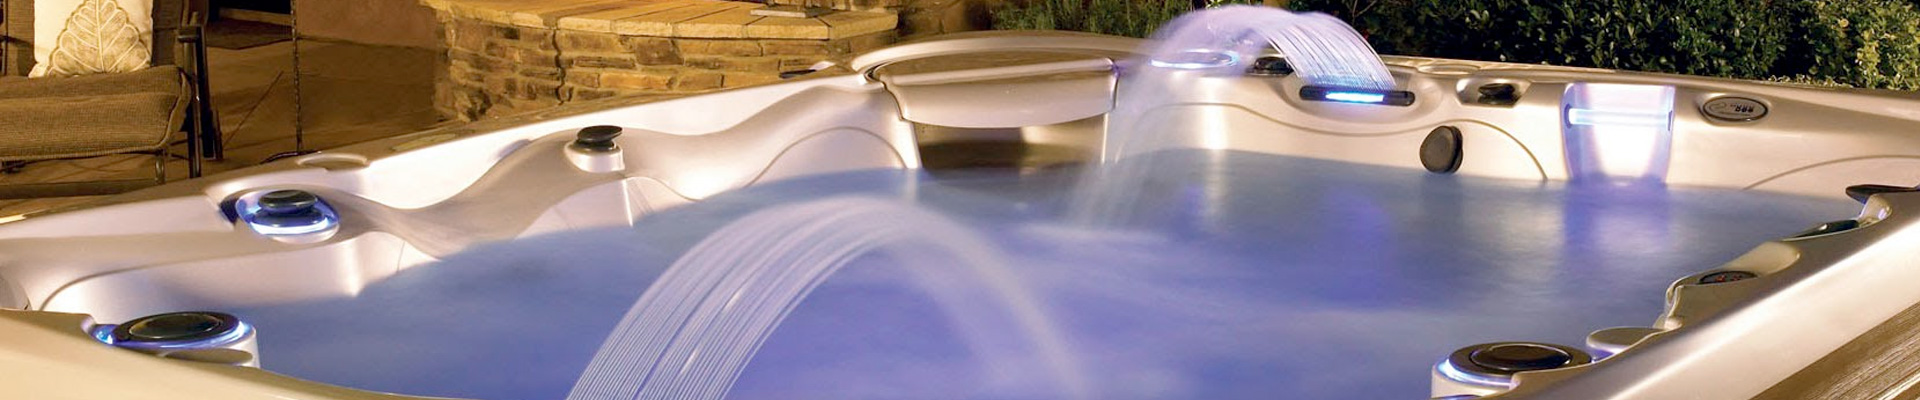 Looking for a Fair Deal on a Hot Tub?  Visit a Local Dealer, not the Fairgrounds